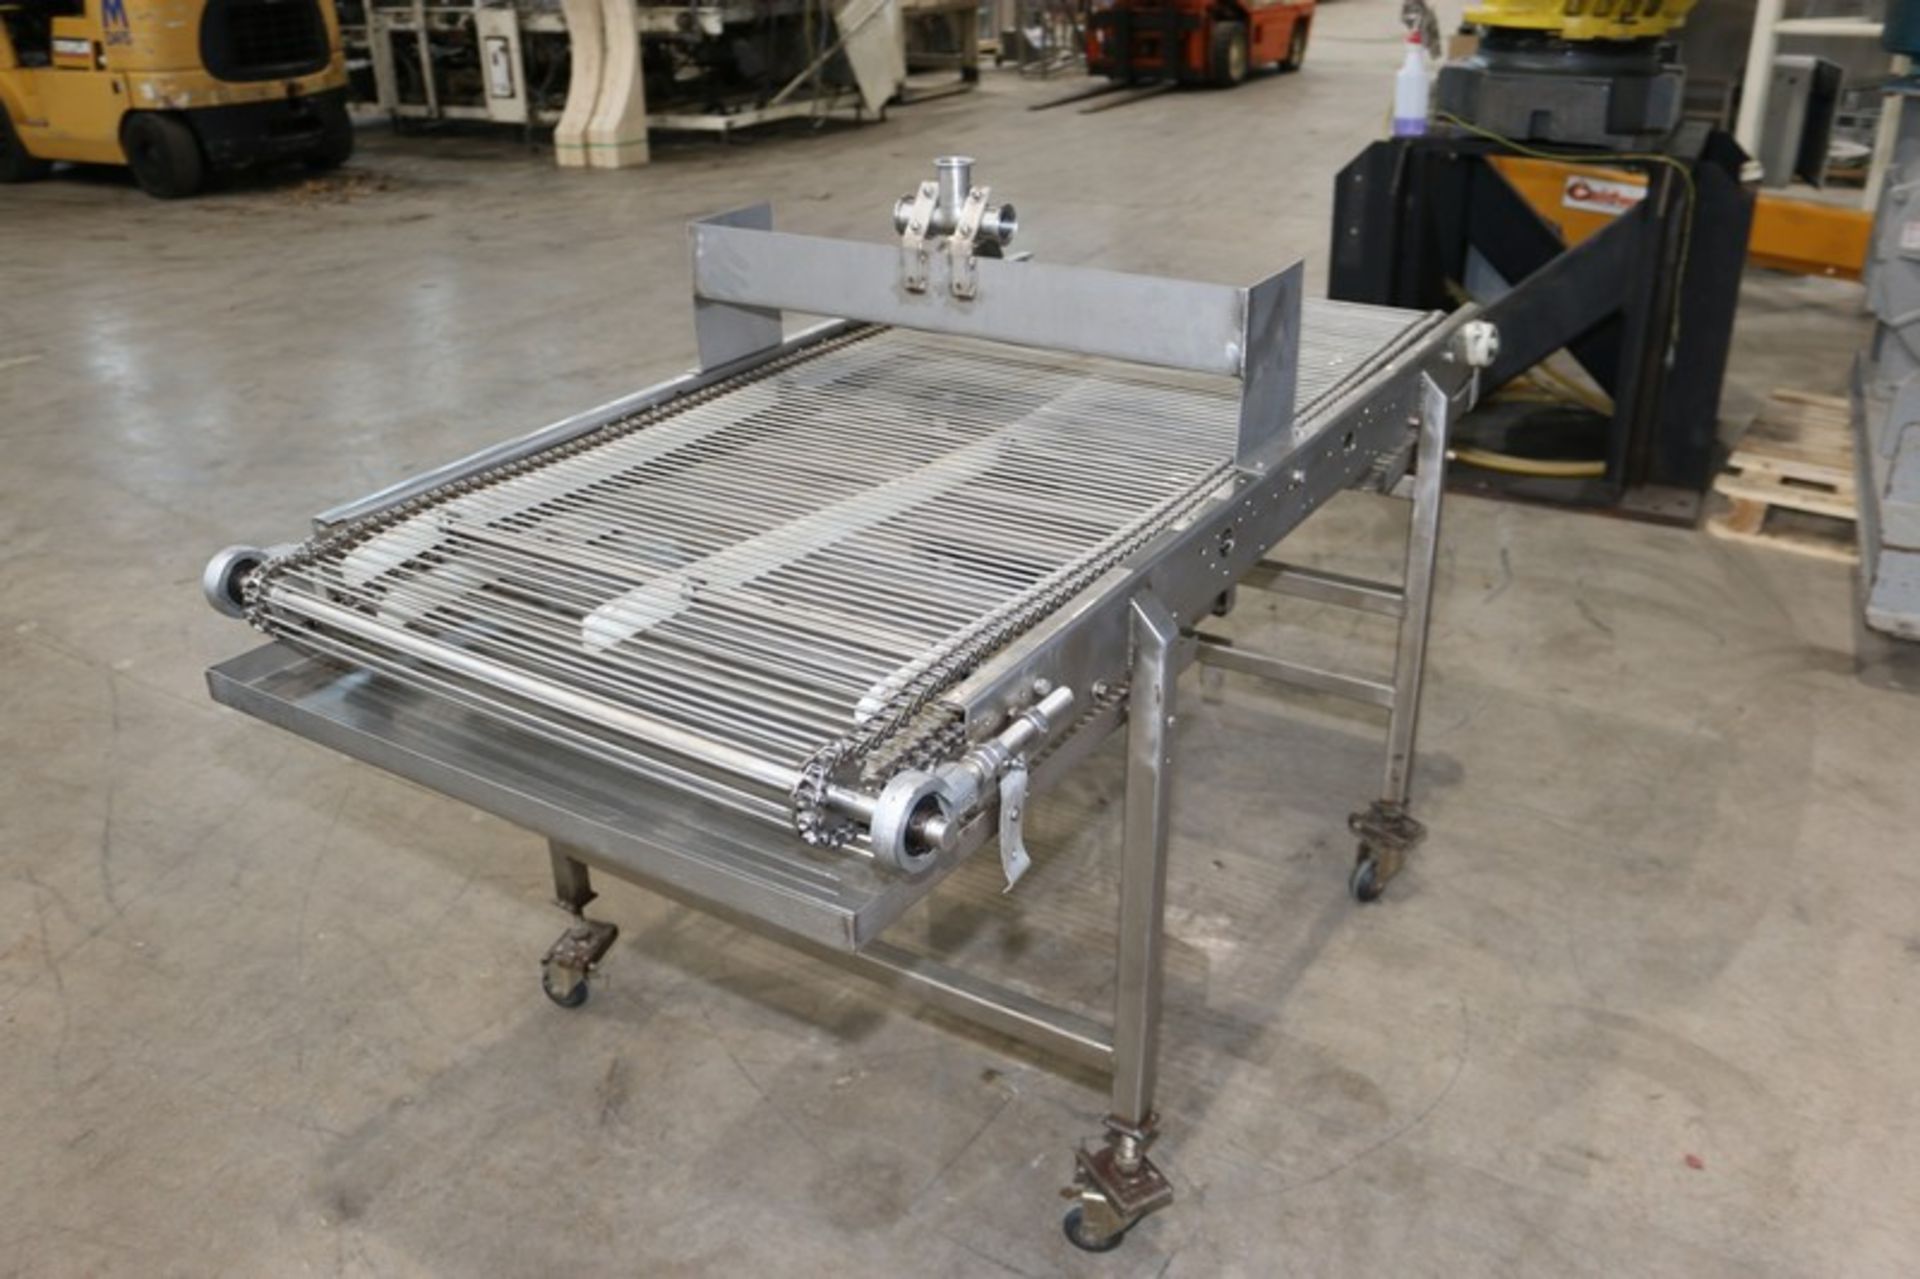 Straight Section of S/S Conveyor, with Top Applicator Mounted, Aprox. 29" W Belt with Motor, Mounted - Image 6 of 6